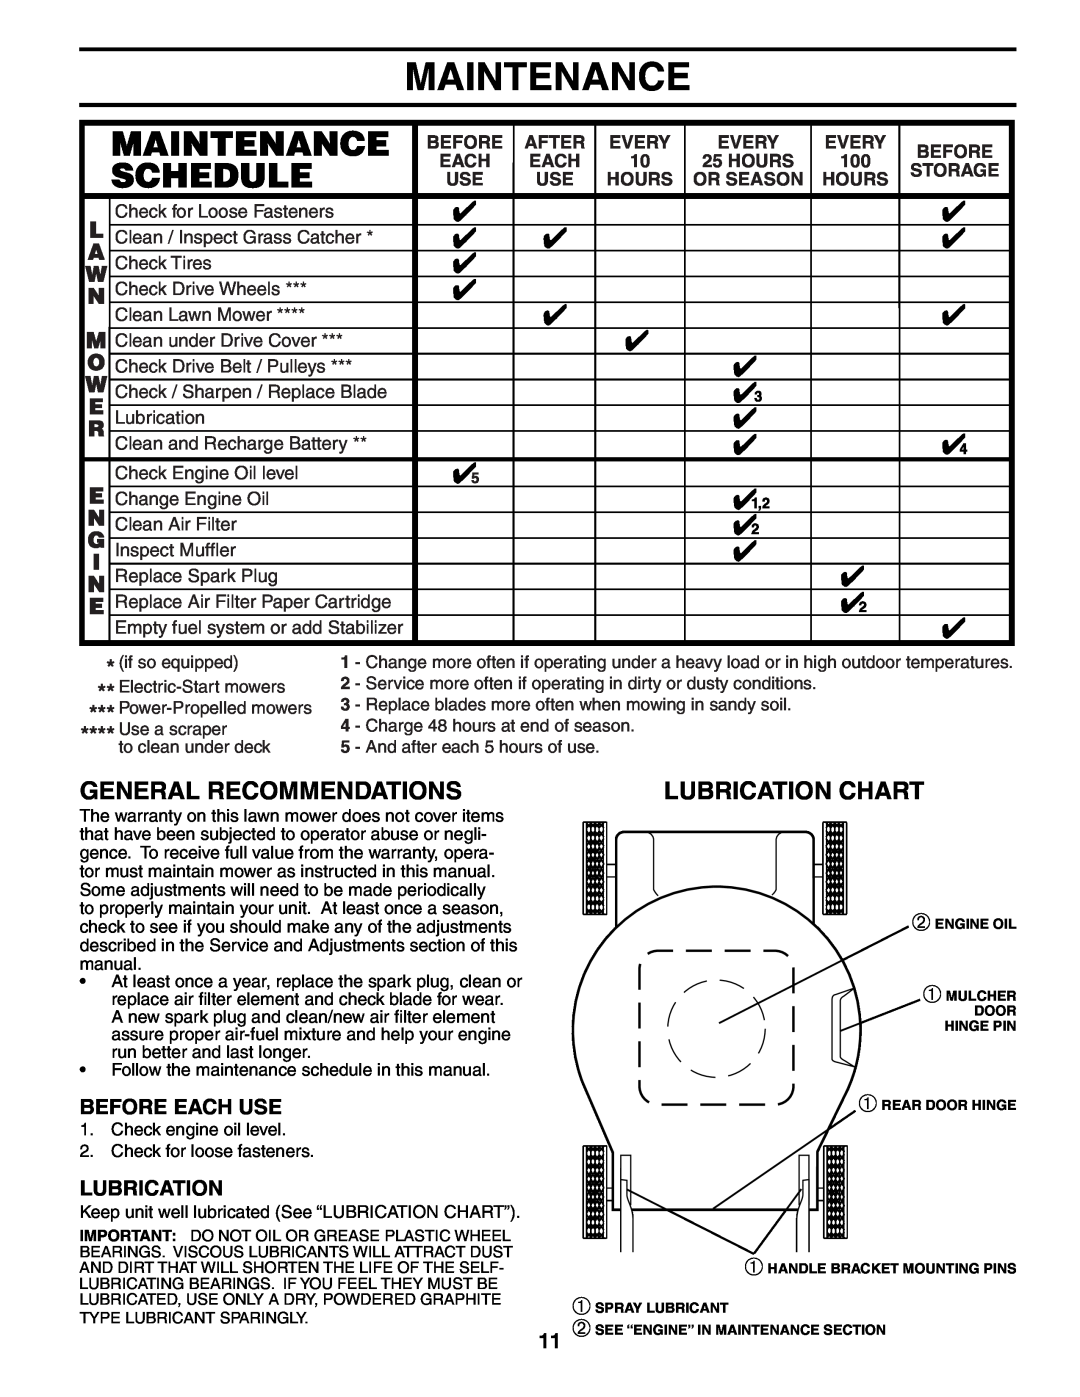 Husqvarna 917.37594 Maintenance, General Recommendations, Lubrication Chart, Before Each Use, After, Every, Hours, Storage 